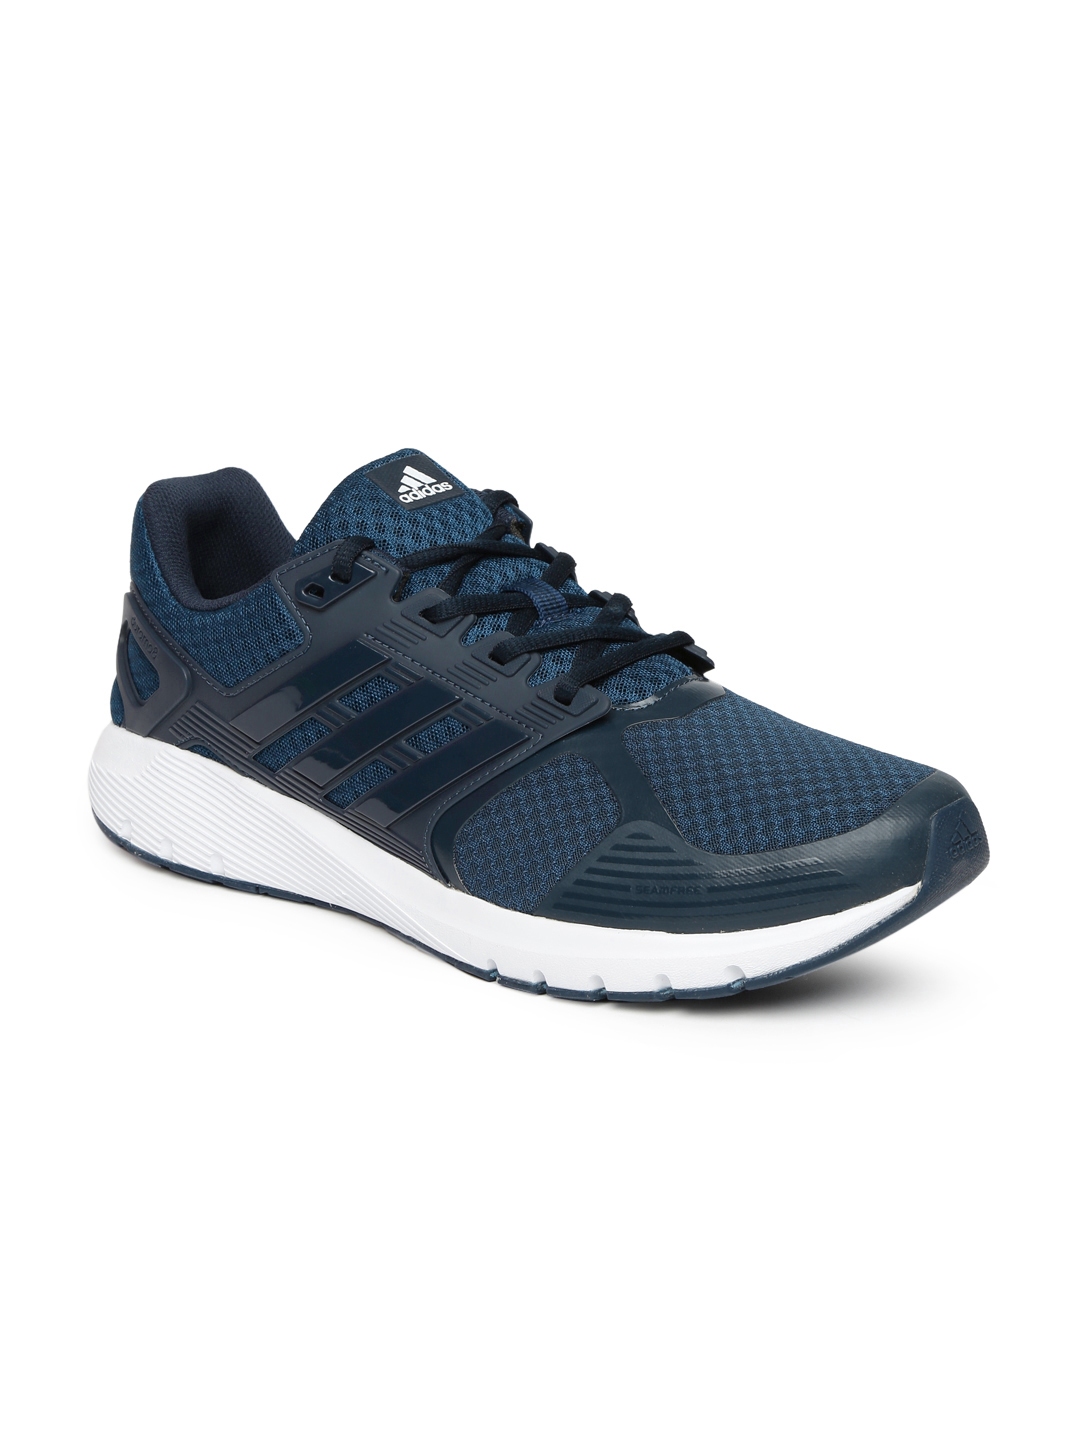 Buy ADIDAS Men Navy Blue DURAMO 8 M Running Shoes - Sports Shoes for ...